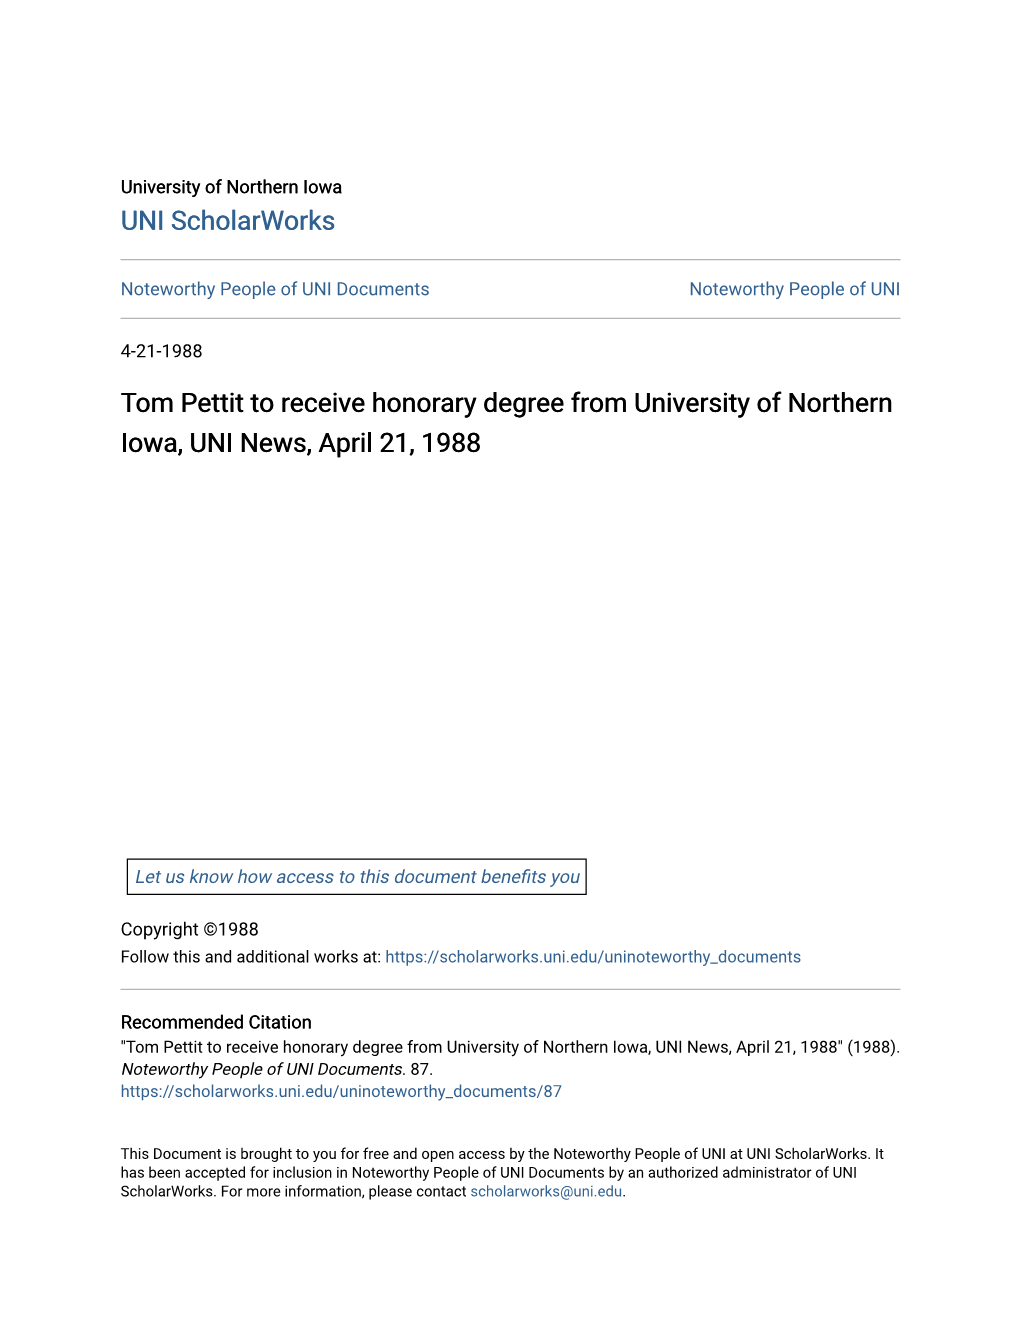 Tom Pettit to Receive Honorary Degree from University of Northern Iowa, UNI News, April 21, 1988